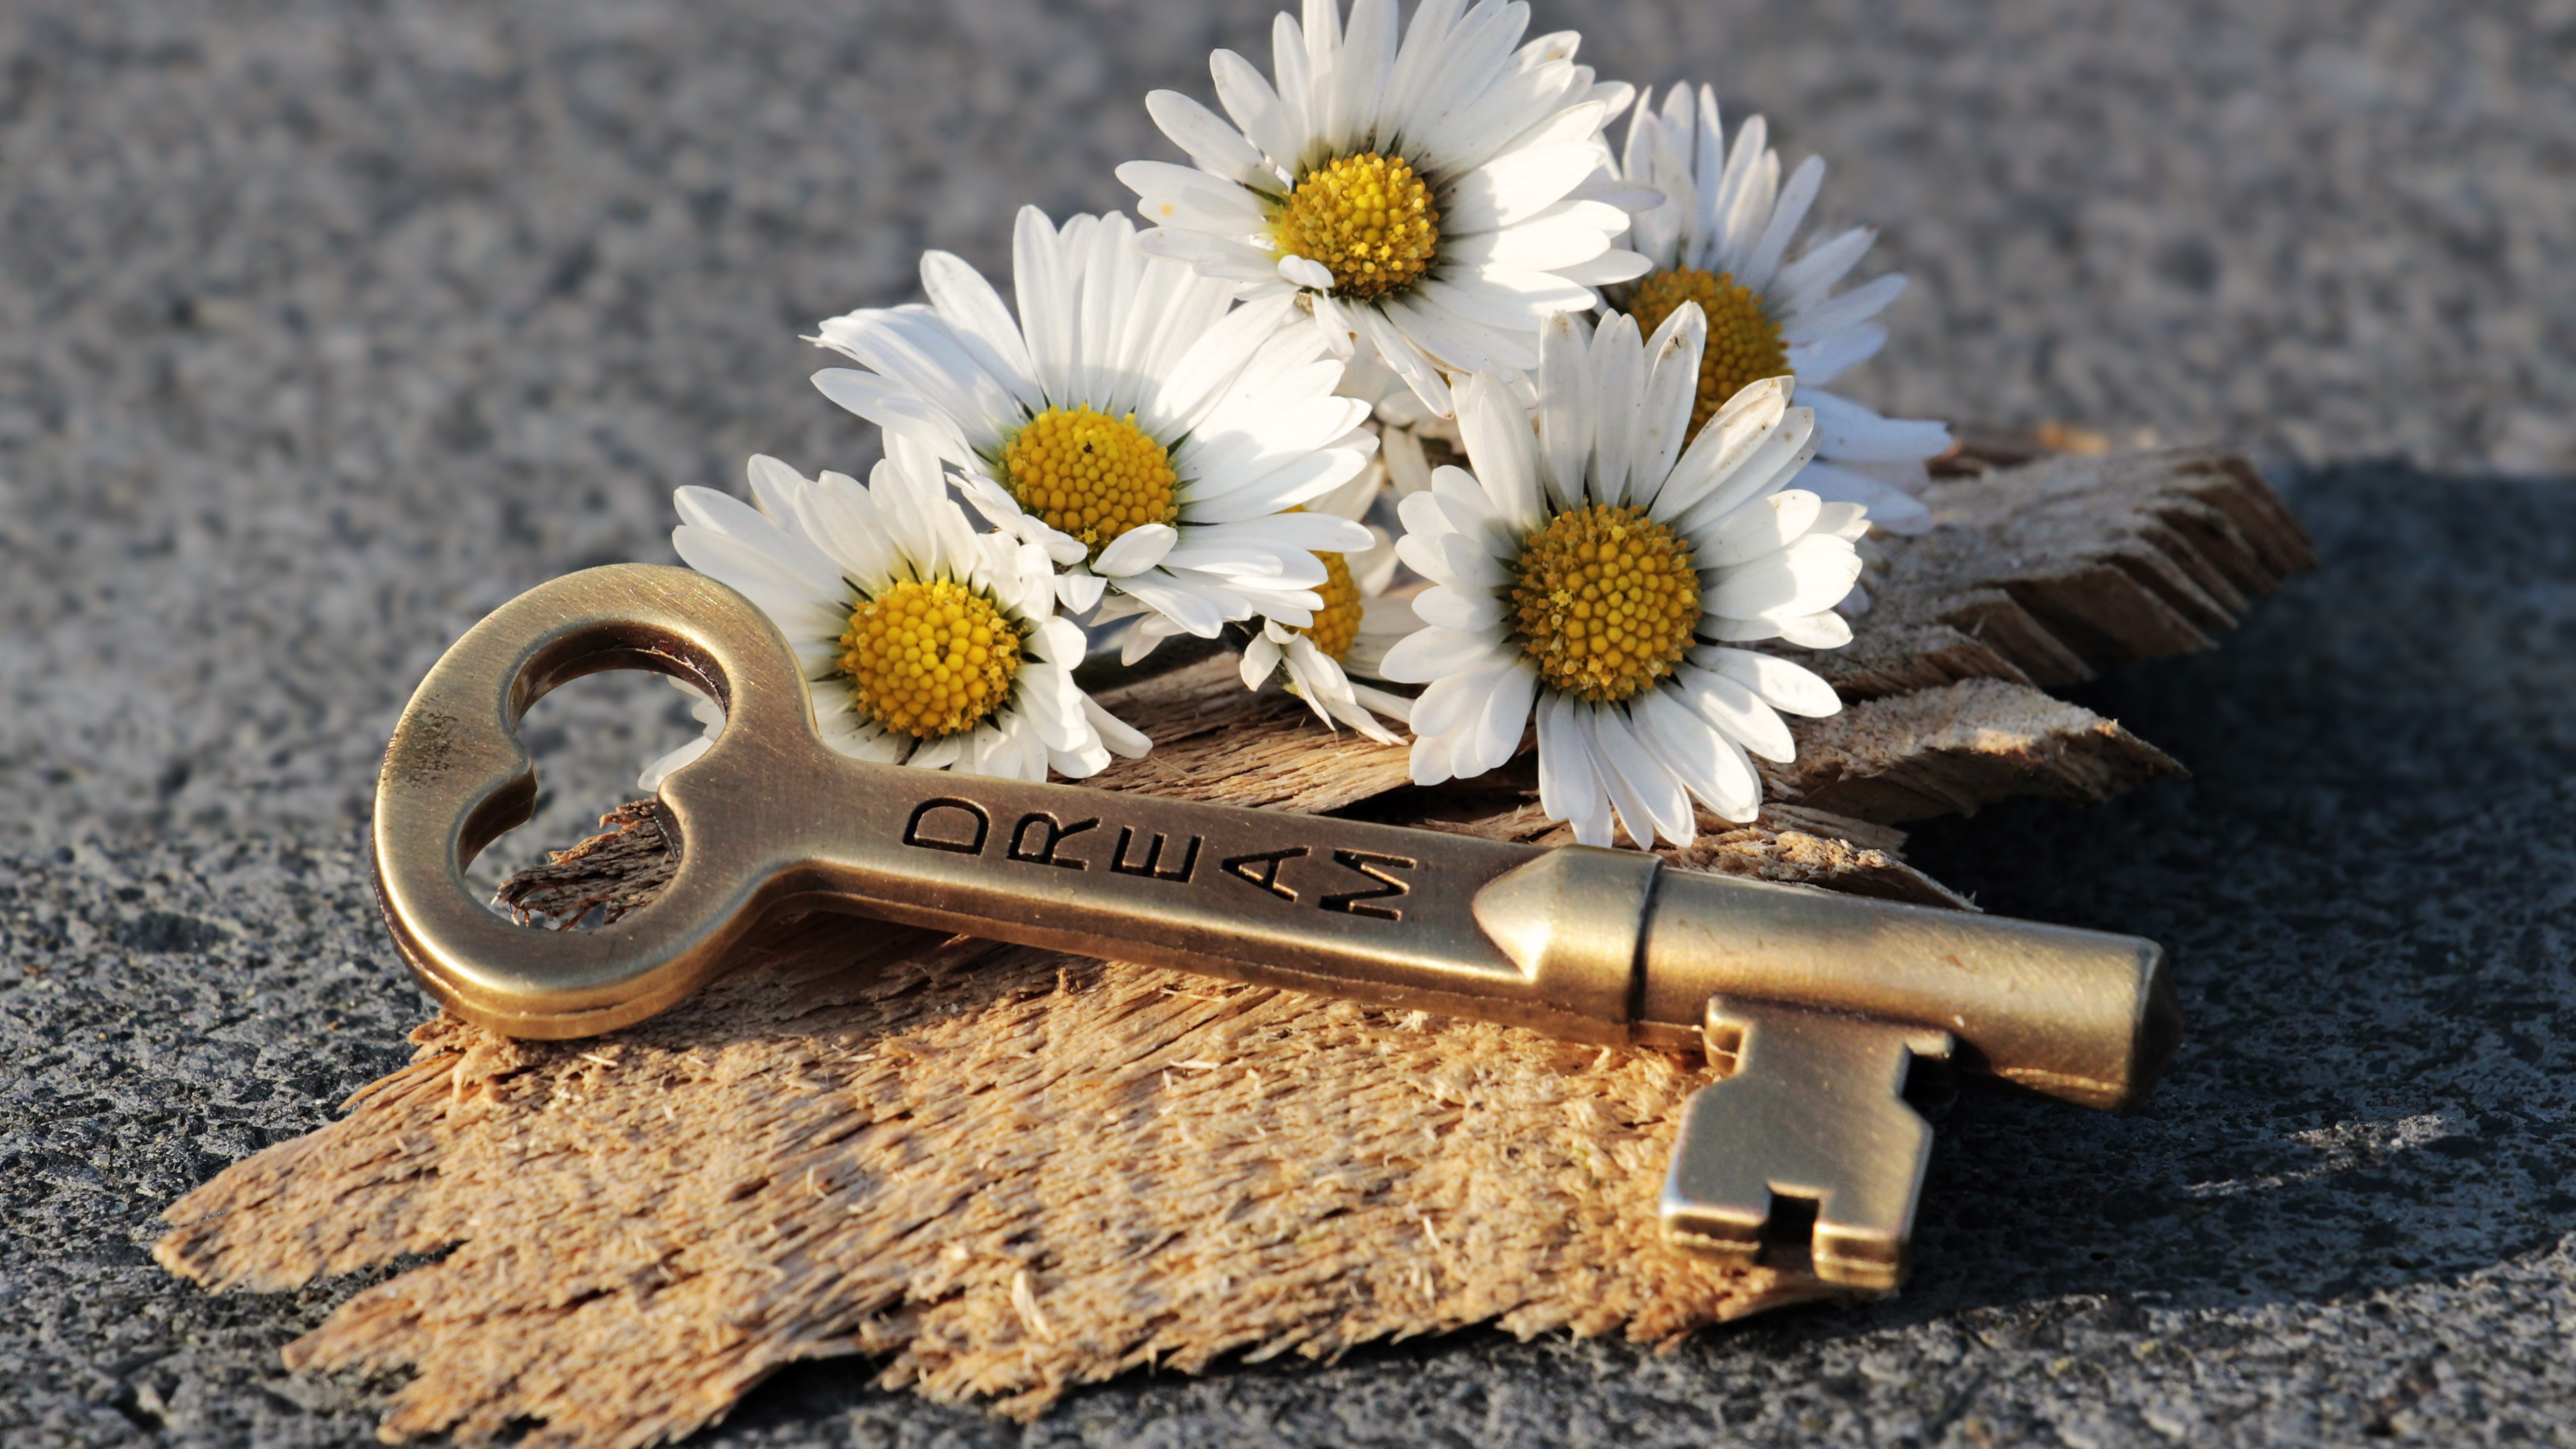 The dreams key and daisy flowers wallpaper 5120x2880